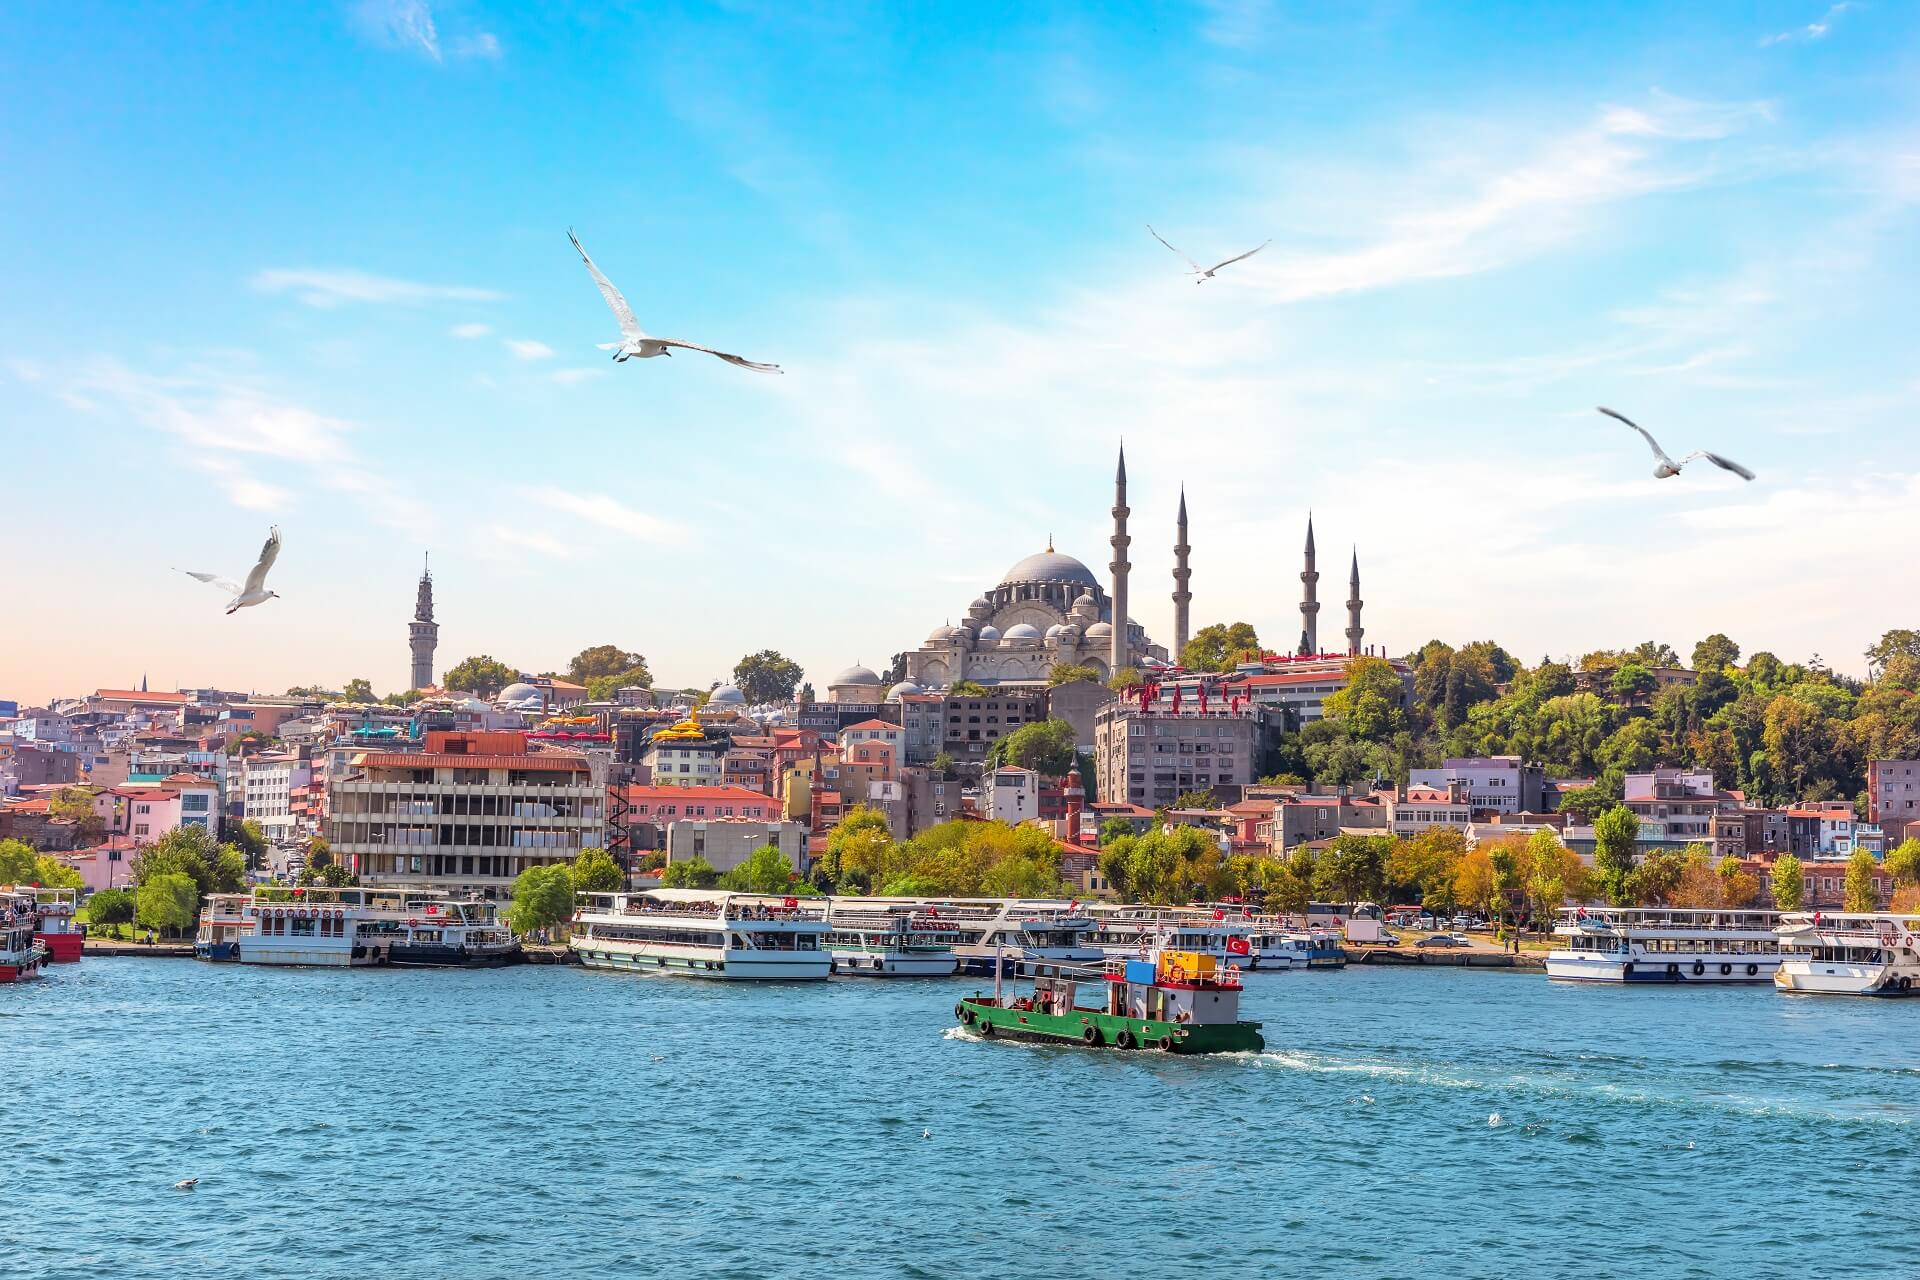 Istanbul Guide